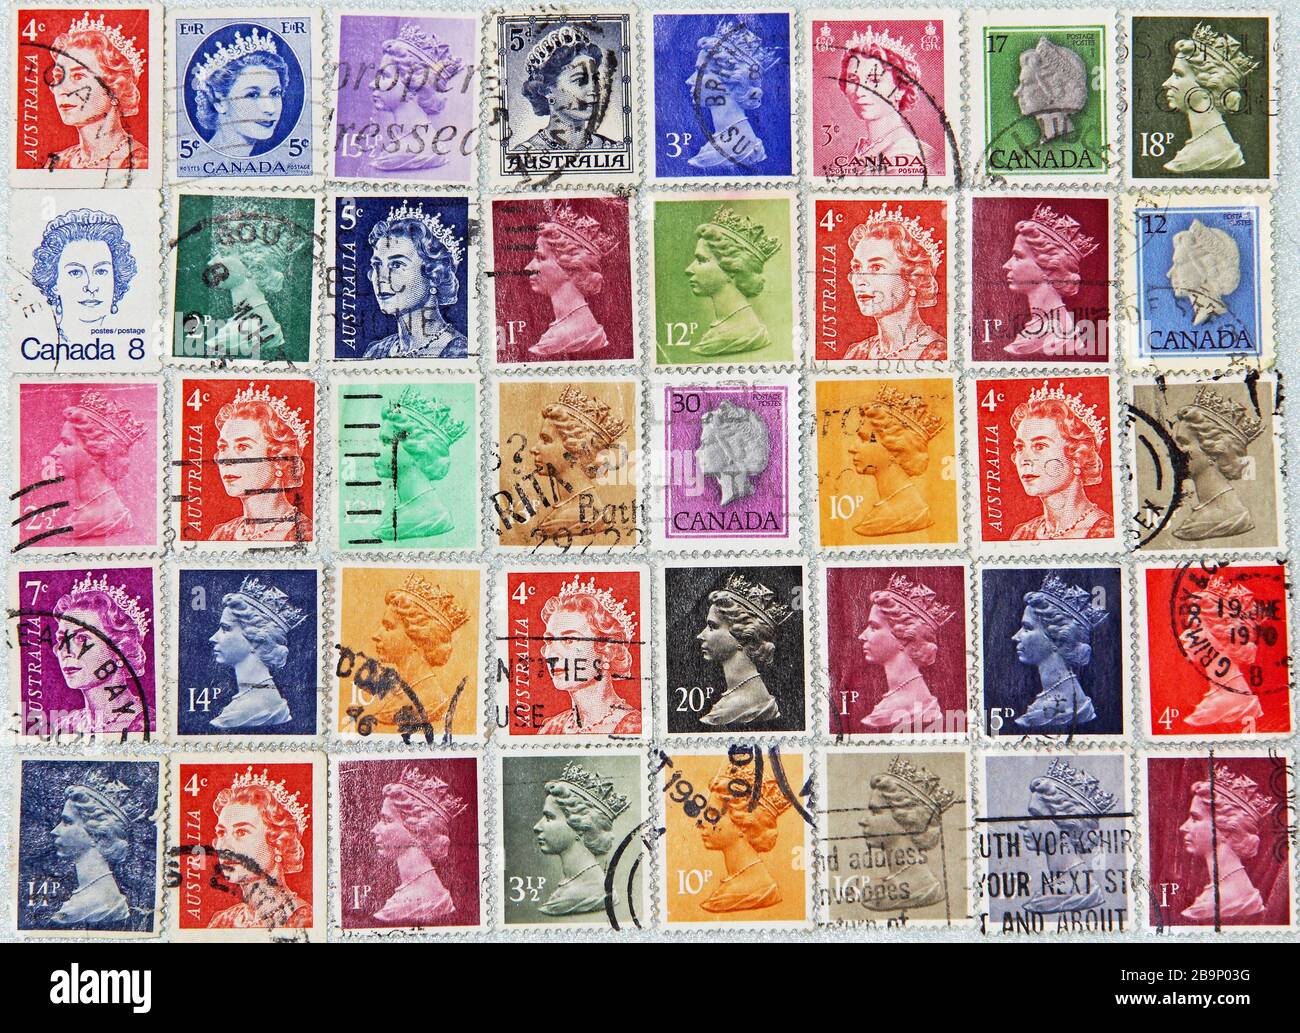 Postage stamps of British Commonwealth countries with image of Her Majesty Queen Elizabeth. Stock Photo